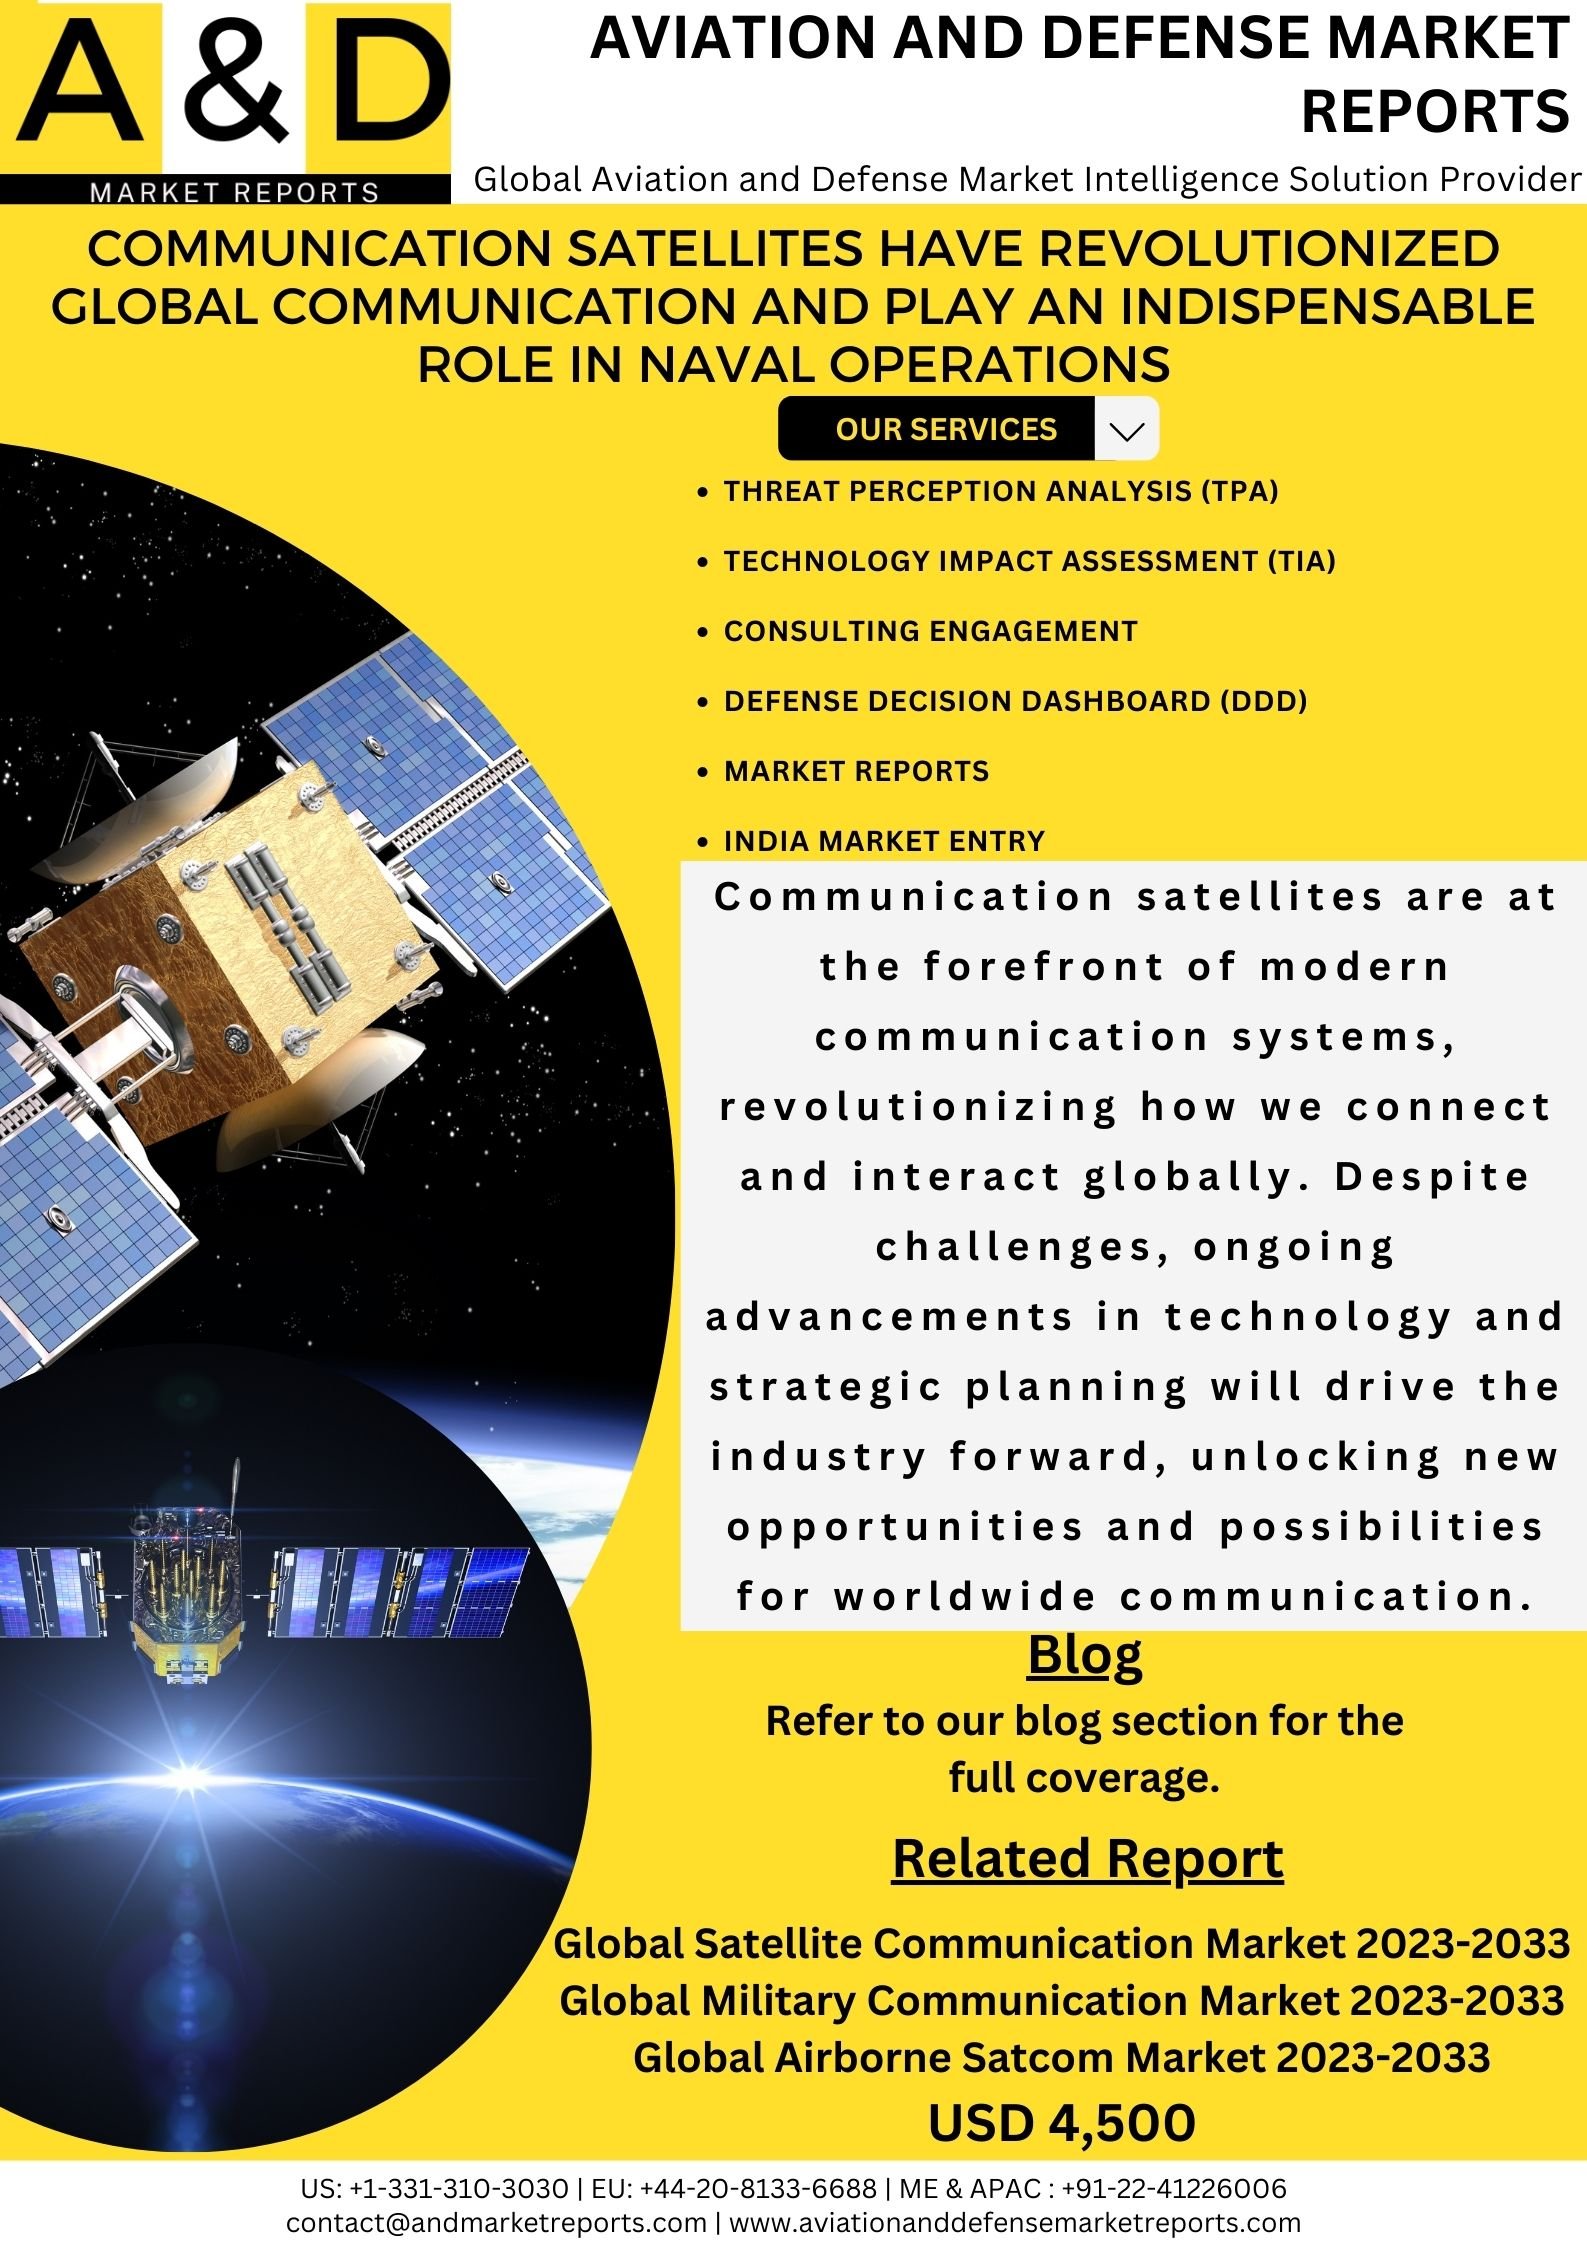 COMMUNICATION SATELLITES HAVE REVOLUTIONIZED GLOBAL COMMUNICATION AND PLAY AN INDISPENSABLE ROLE IN NAVAL OPERATIONS